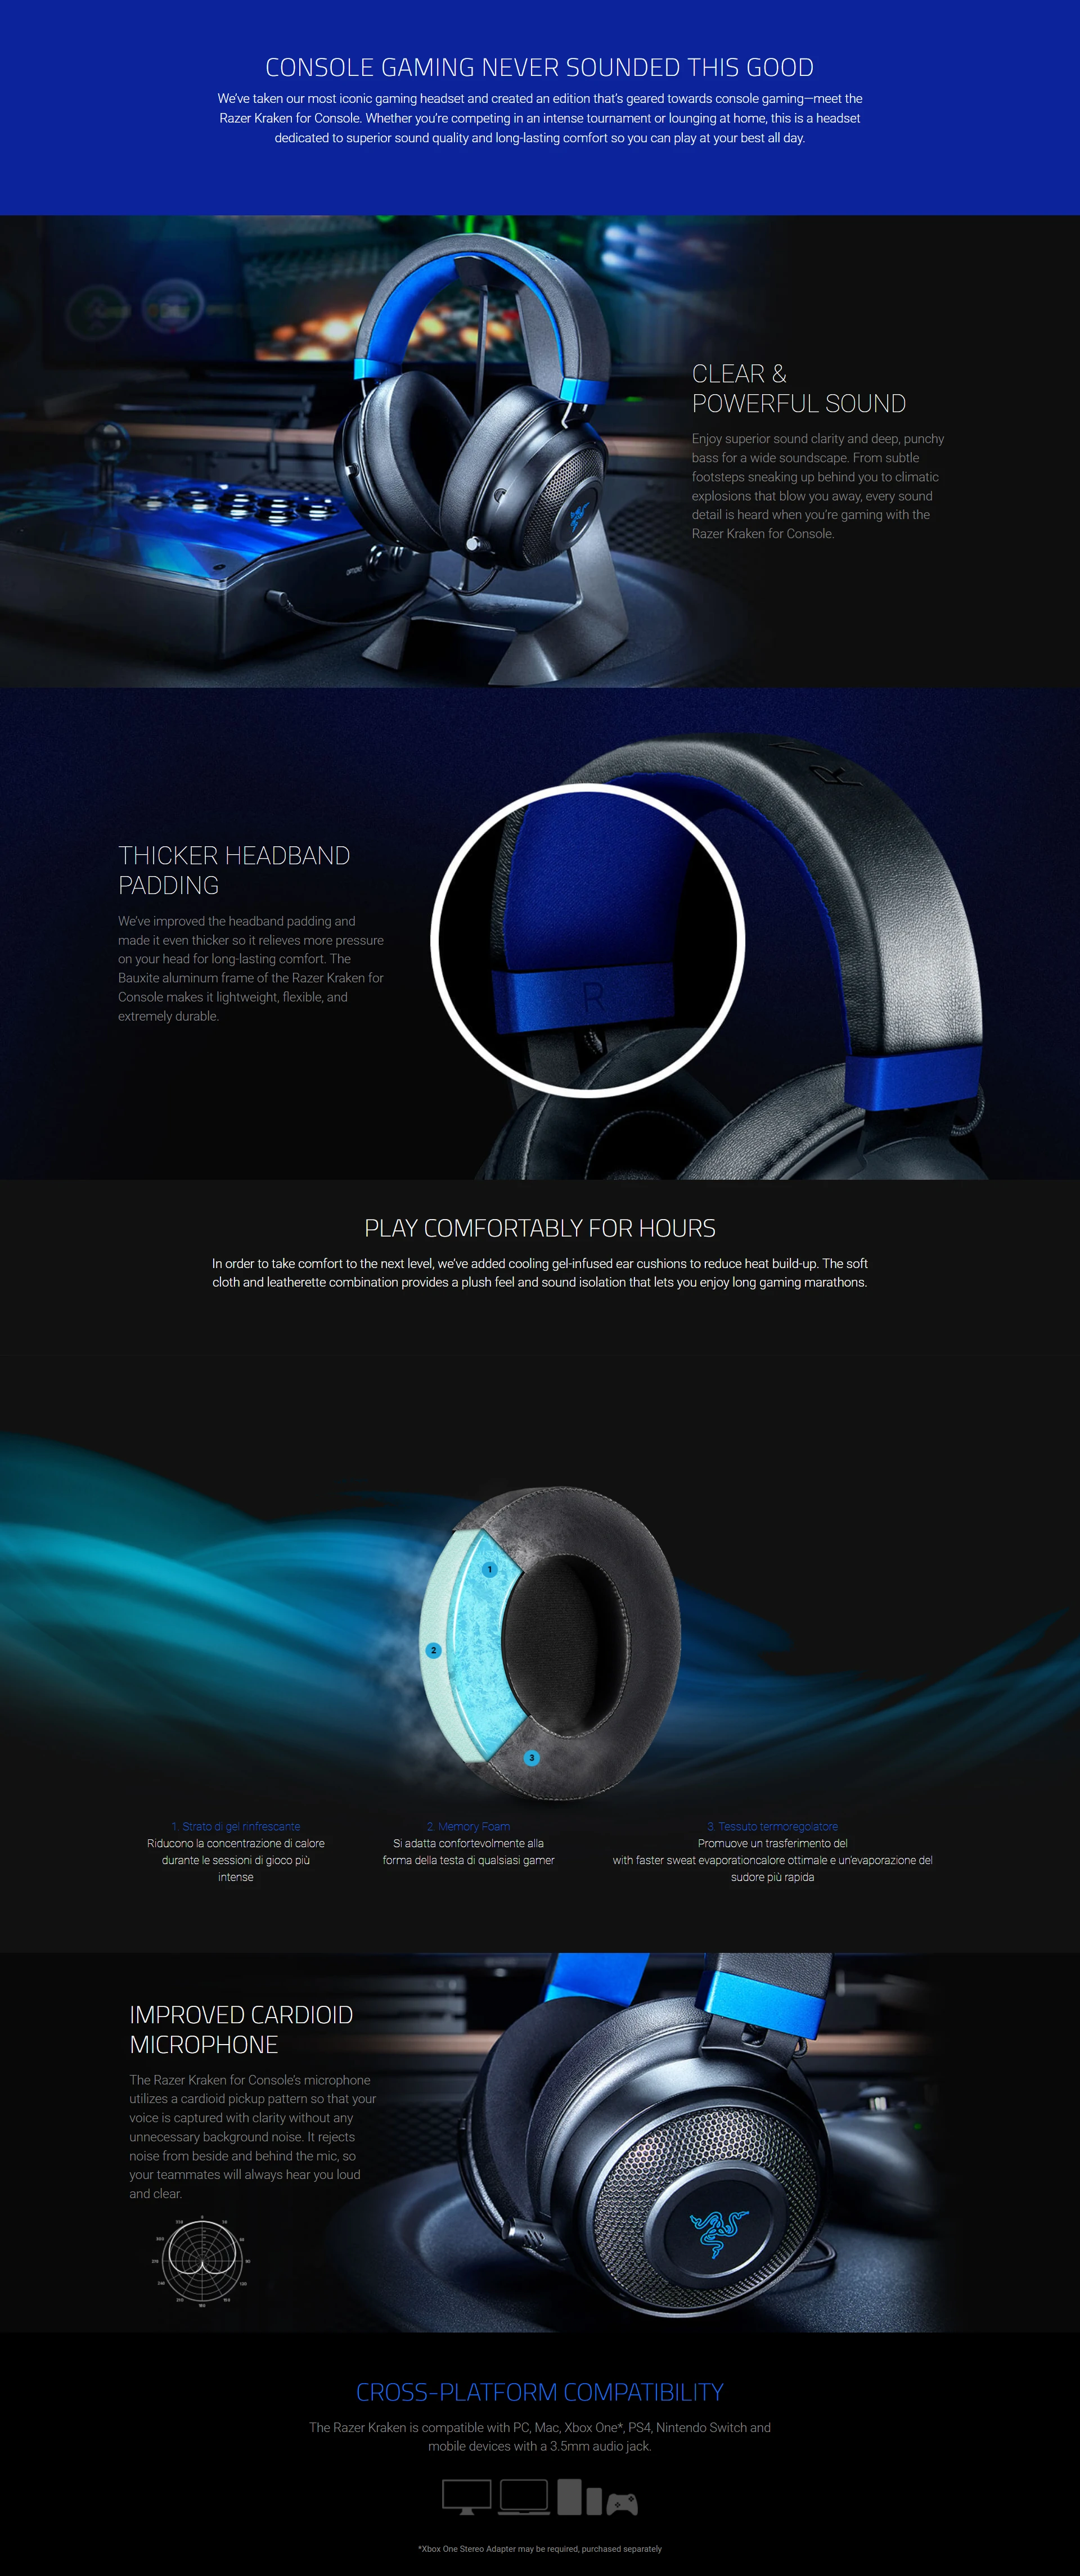 Overview - Razer Kraken Wired Gaming Headset for Console